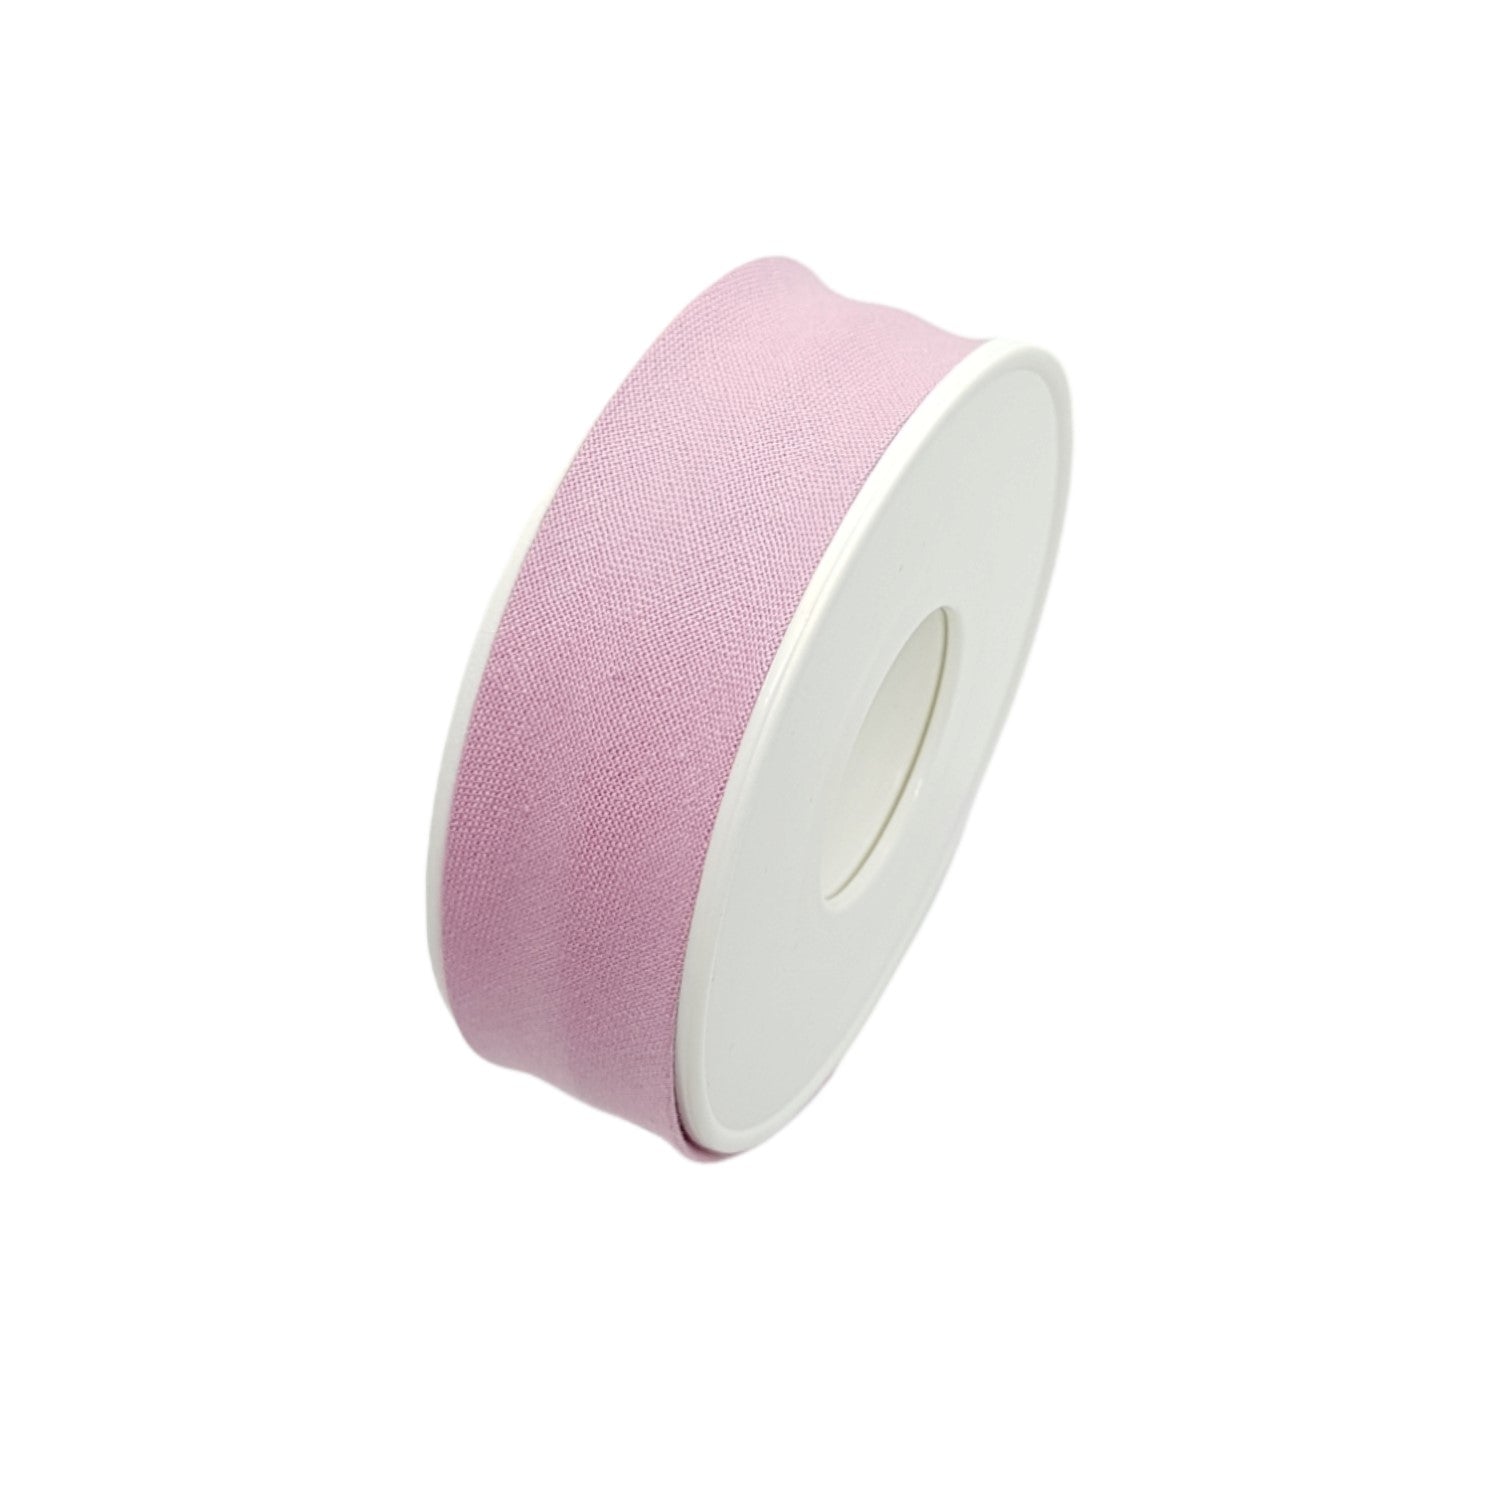 hobby trendy 100% cotton bias binding tape (single fold) 20mm-13/16inch (5meters- 5.46yards) for sewing, seaming, binding, hemming, piping, quilting